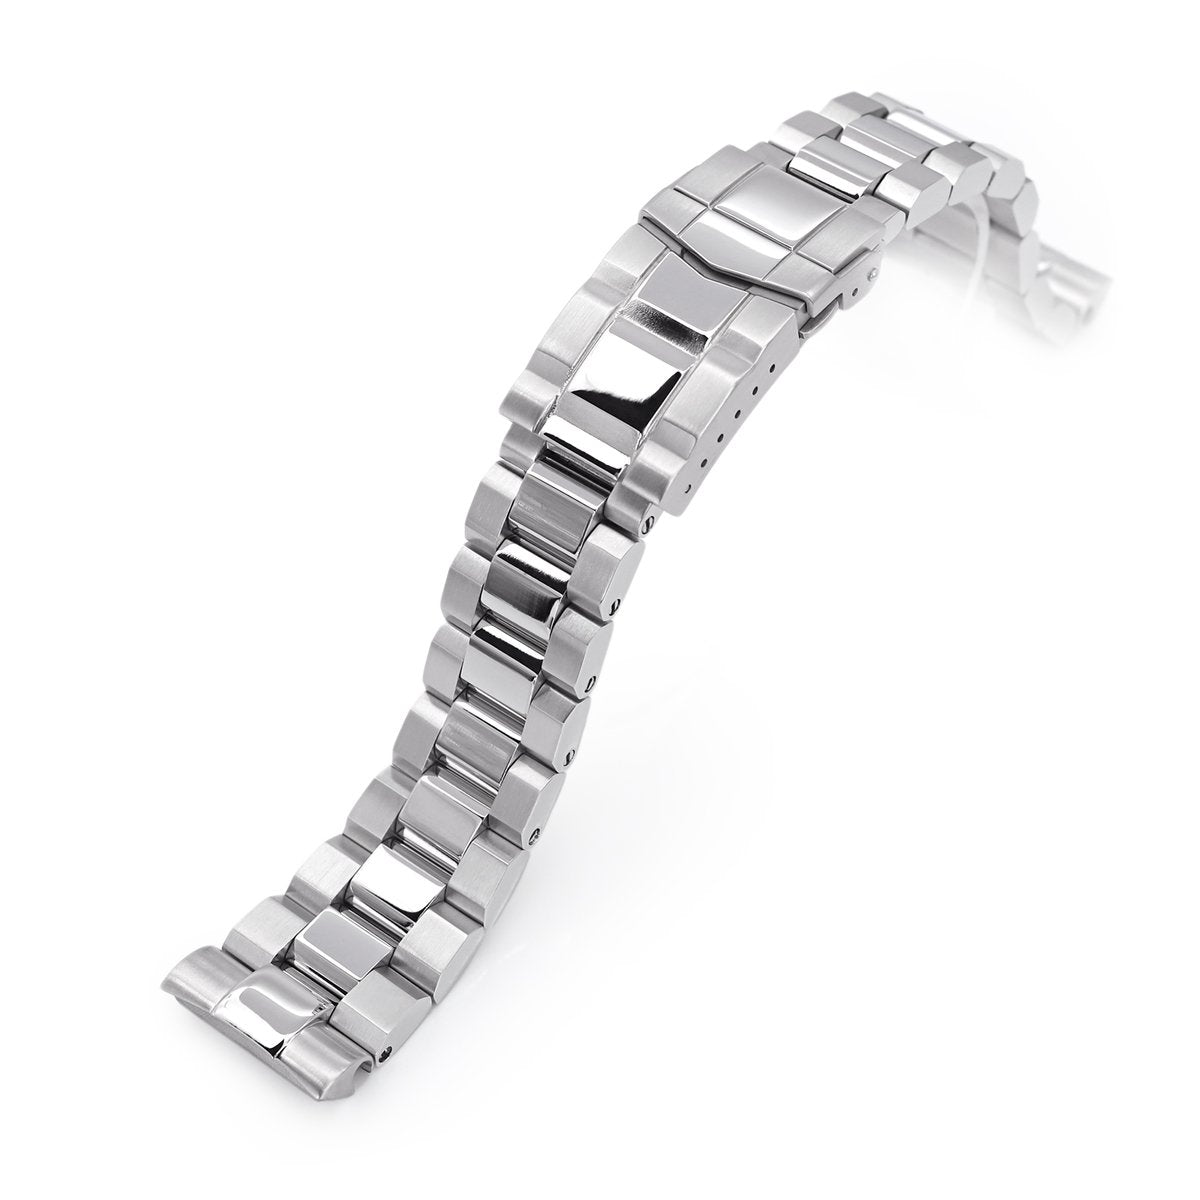 22mm Hexad 316L Stainless Steel Watch Band for Seiko New Turtles SRP777 & PADI SRPA21 Polished & Brushed SUB Clasp Strapcode Watch Bands